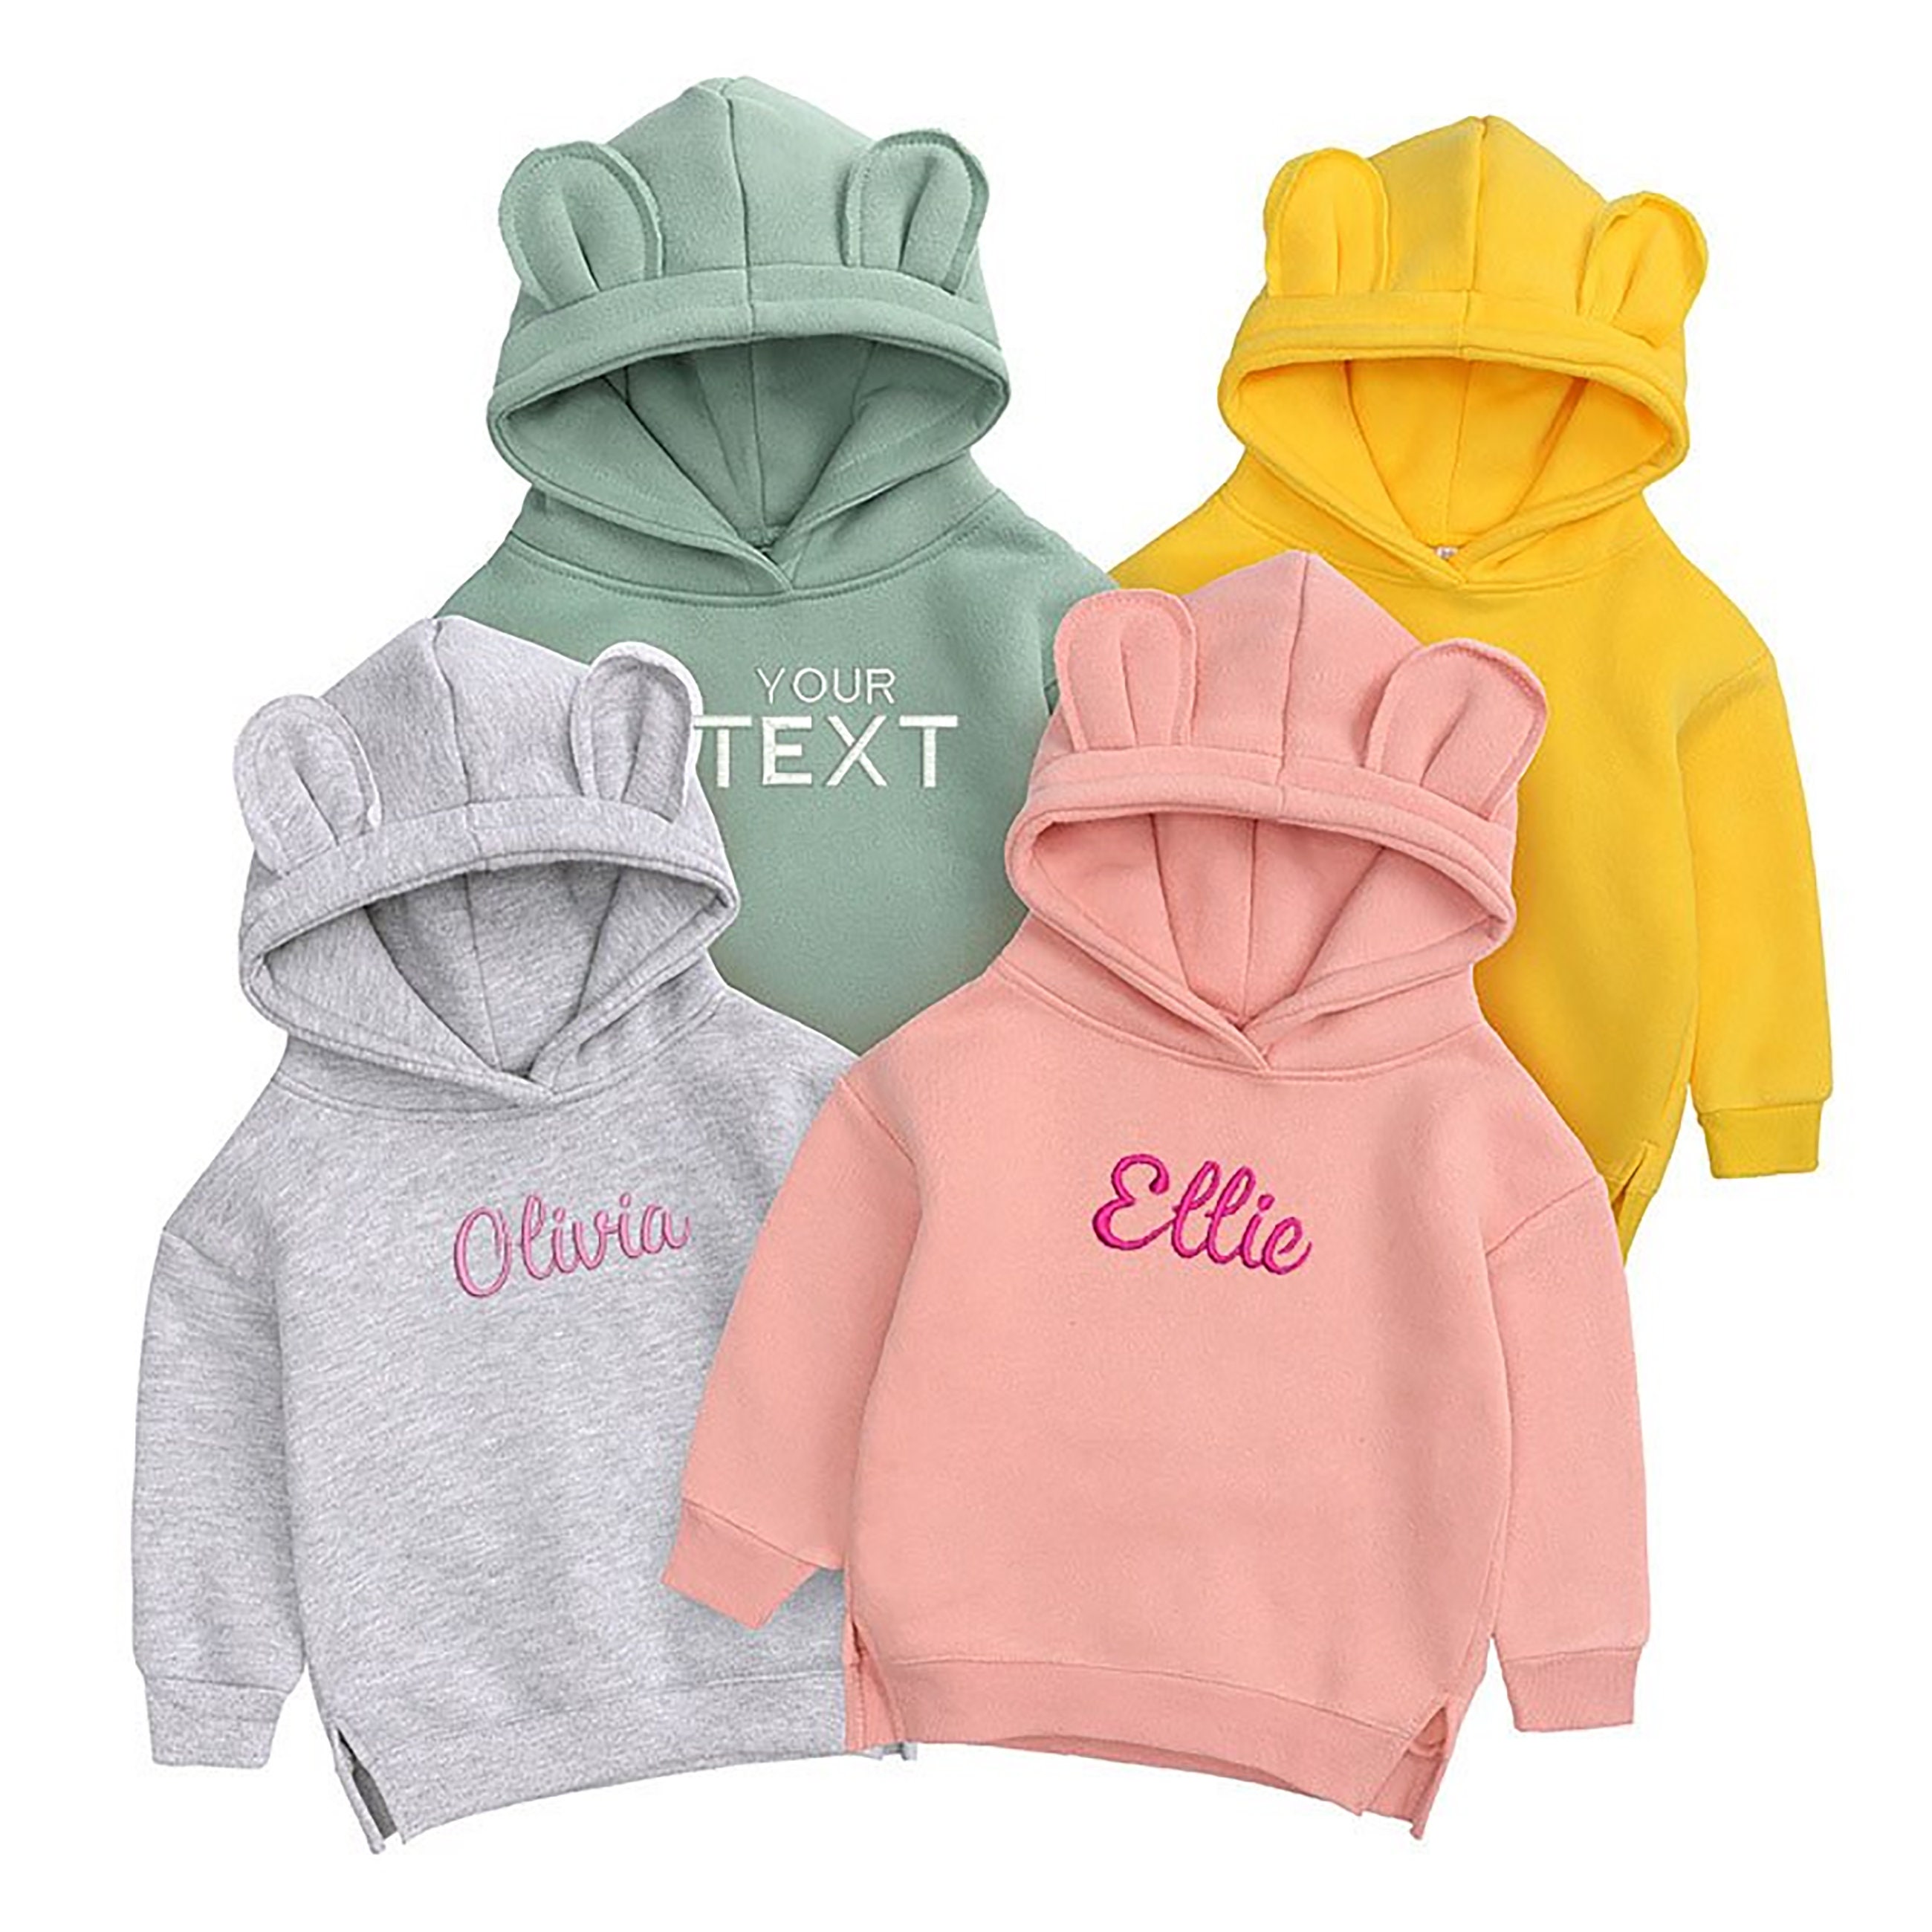 Sweatsuit Rode Kids hoodie Rode Lounge set Going home outfit Super Soft French Terry Hoodie Baby Hoodie Peuter Joggers Kleding Unisex kinderkleding Unisex babykleding Hoodies & Sweatshirts 